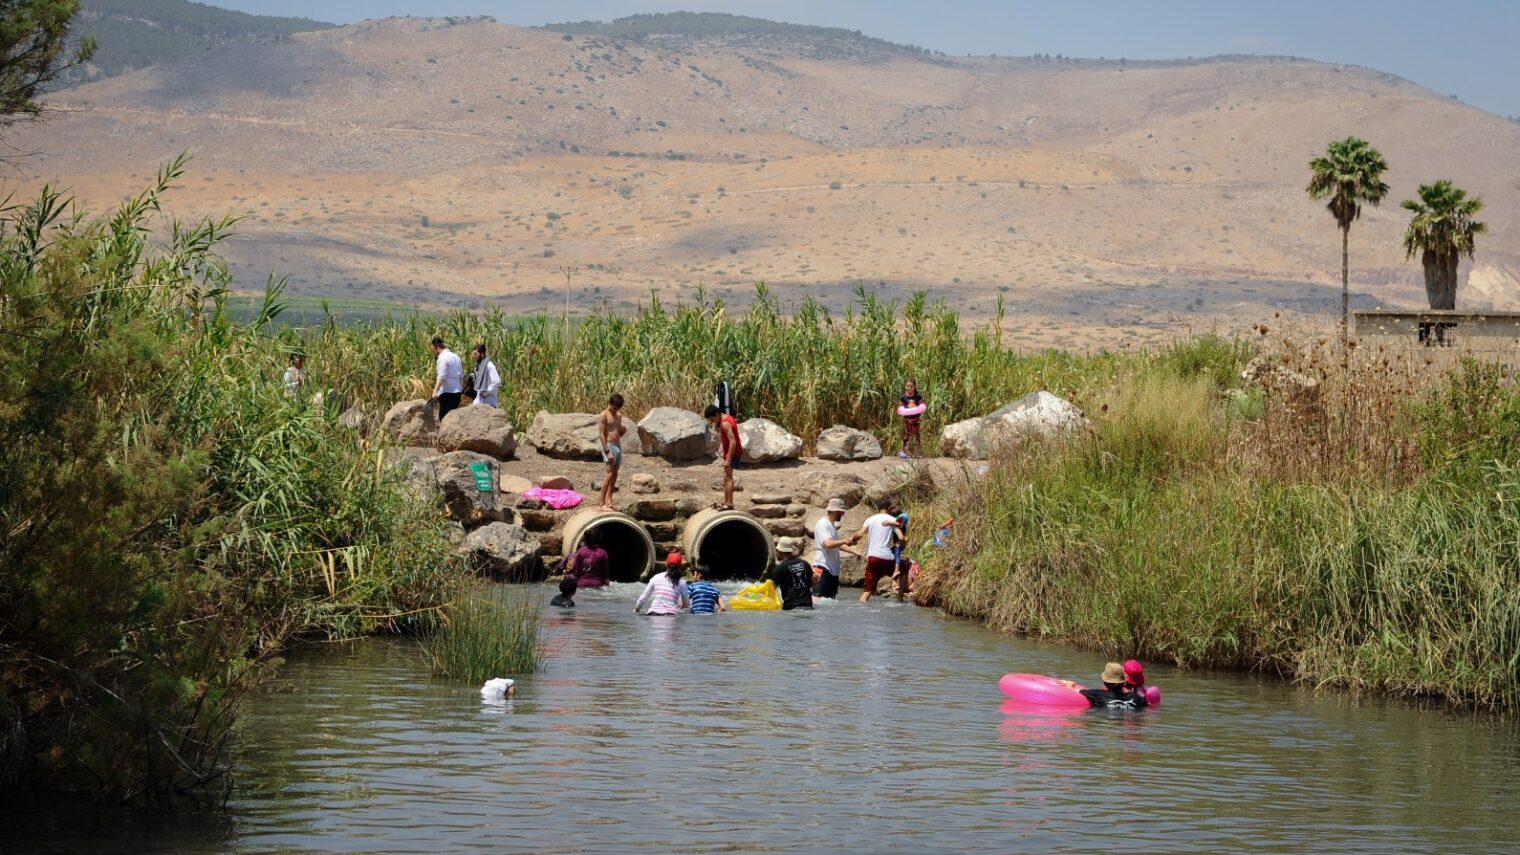 Israelis enjoying the natural pool at Hakibbutzim River in Beit She’an. Photo by Mendy Hechtman/FLASH90